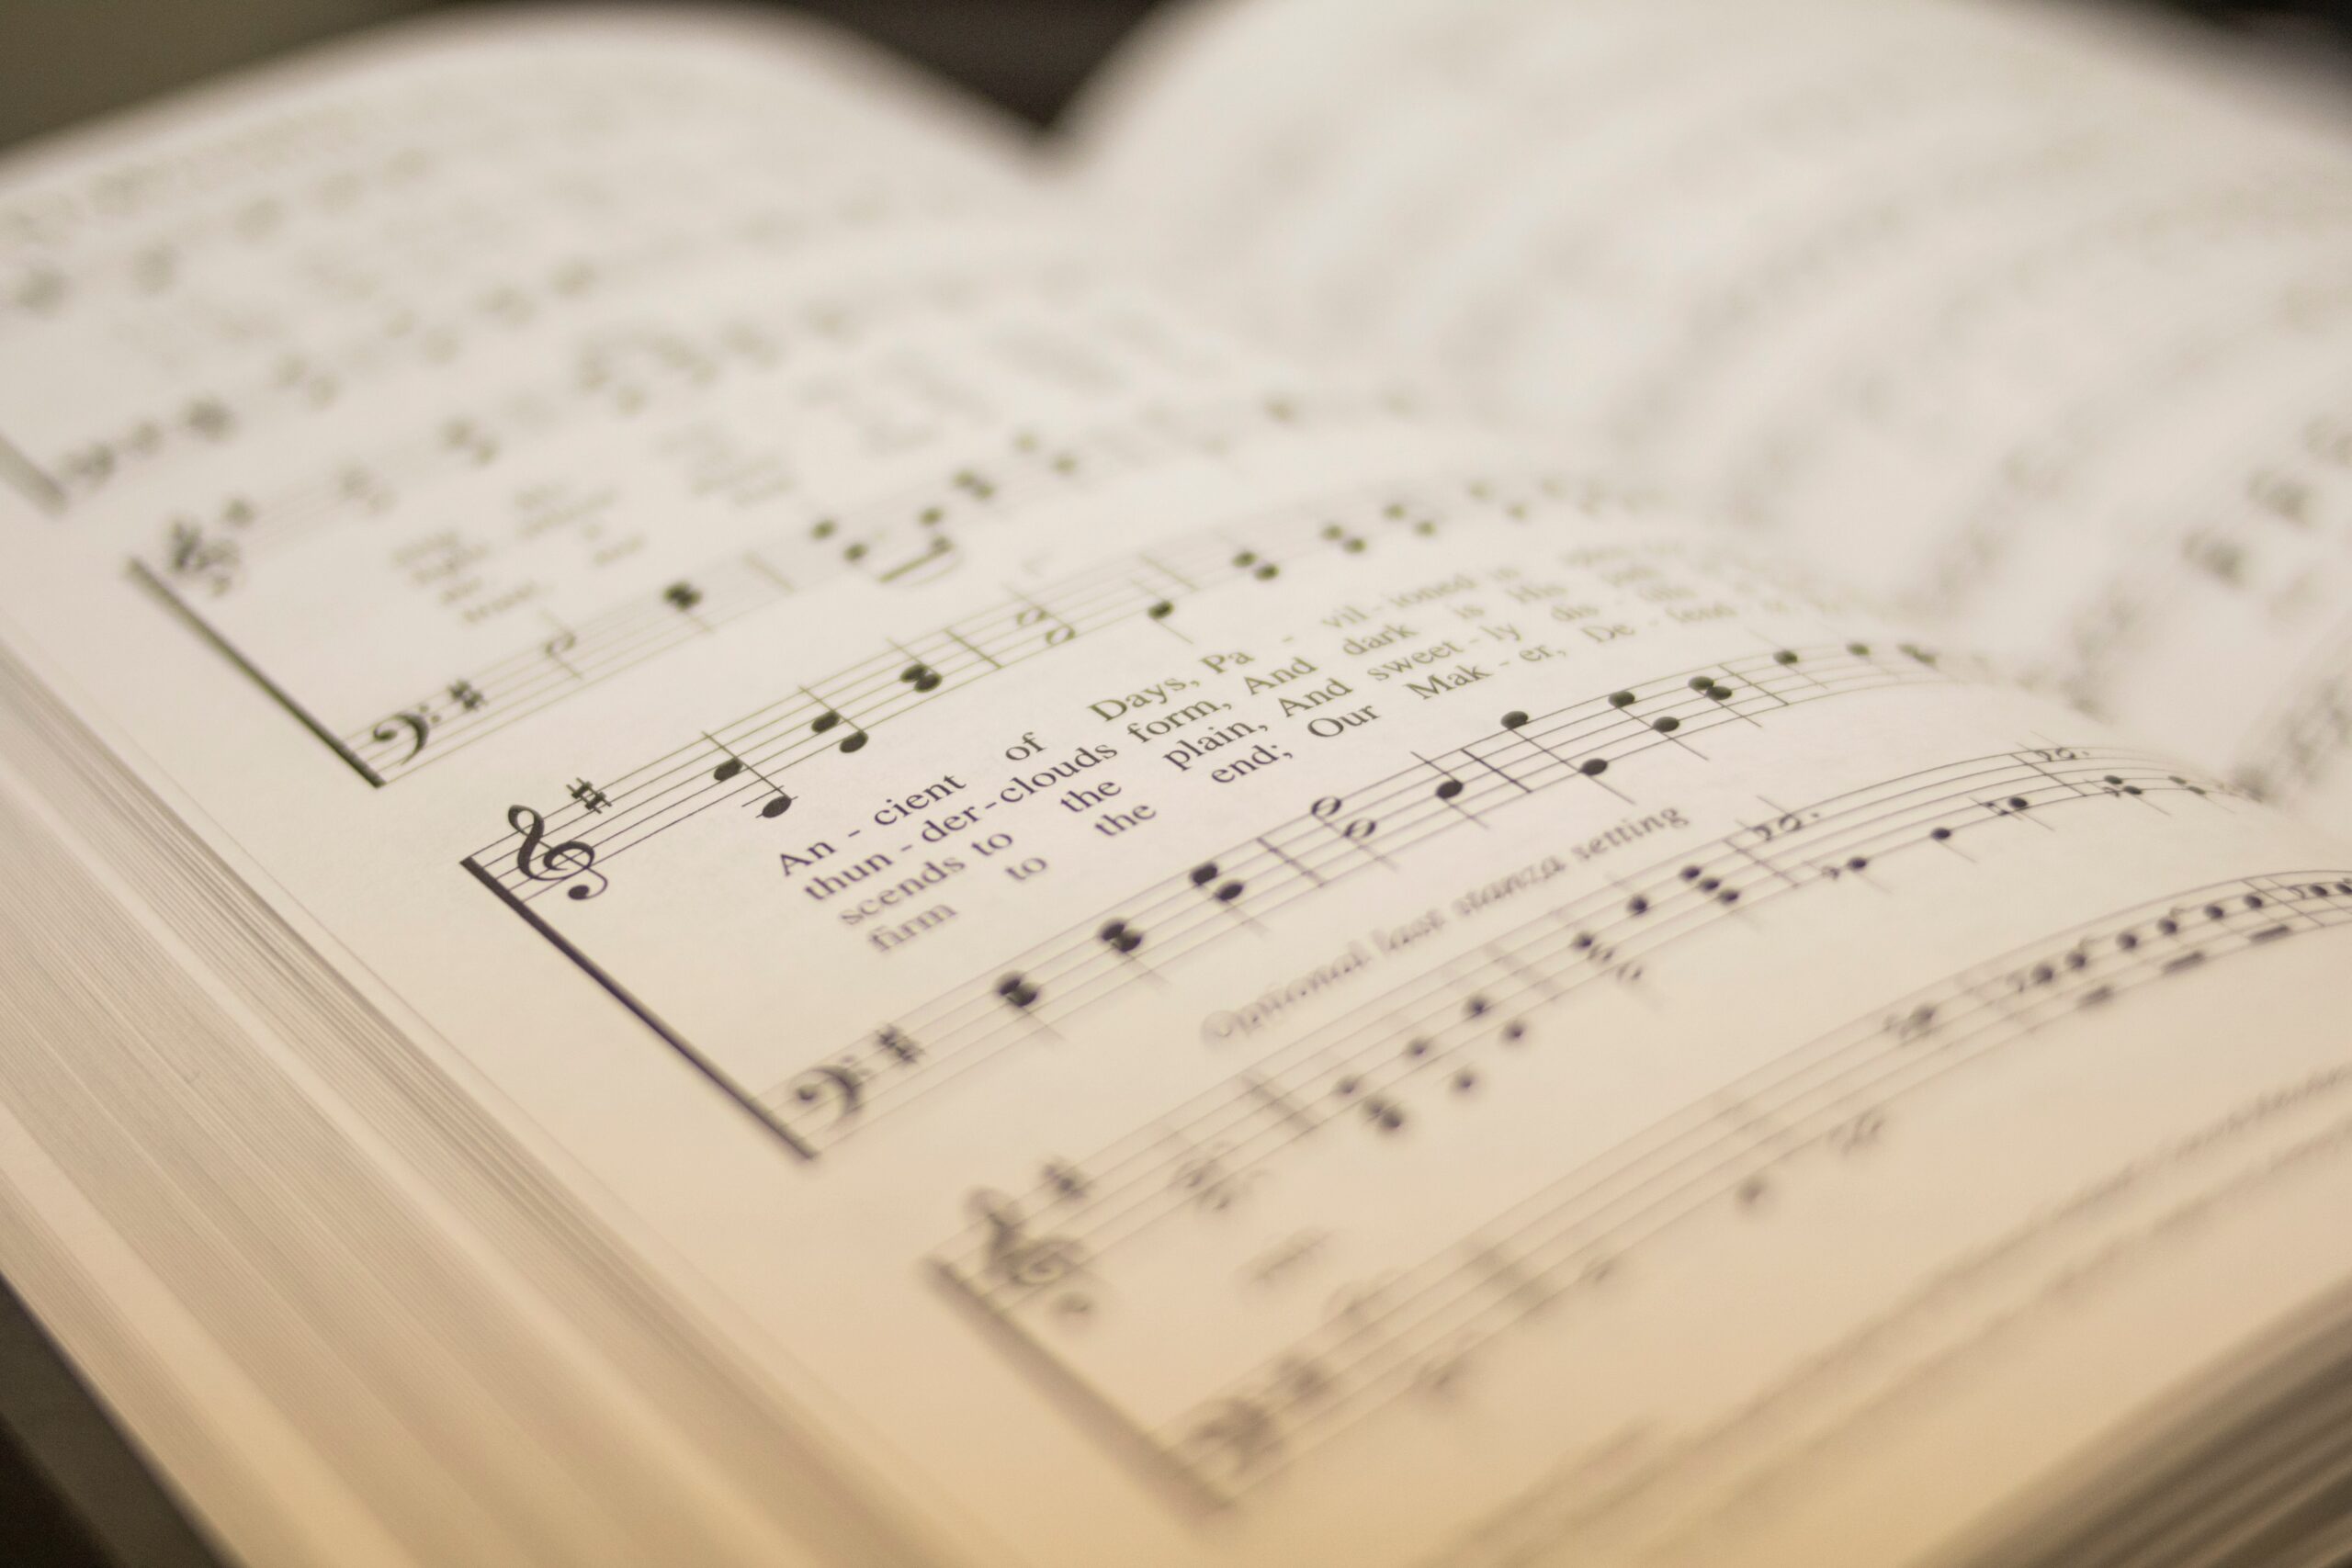 Photo by Michael Maasen on Unsplash. A closeup of a hymnal, open to "O Worship the King" (written by Grant/Haydn)